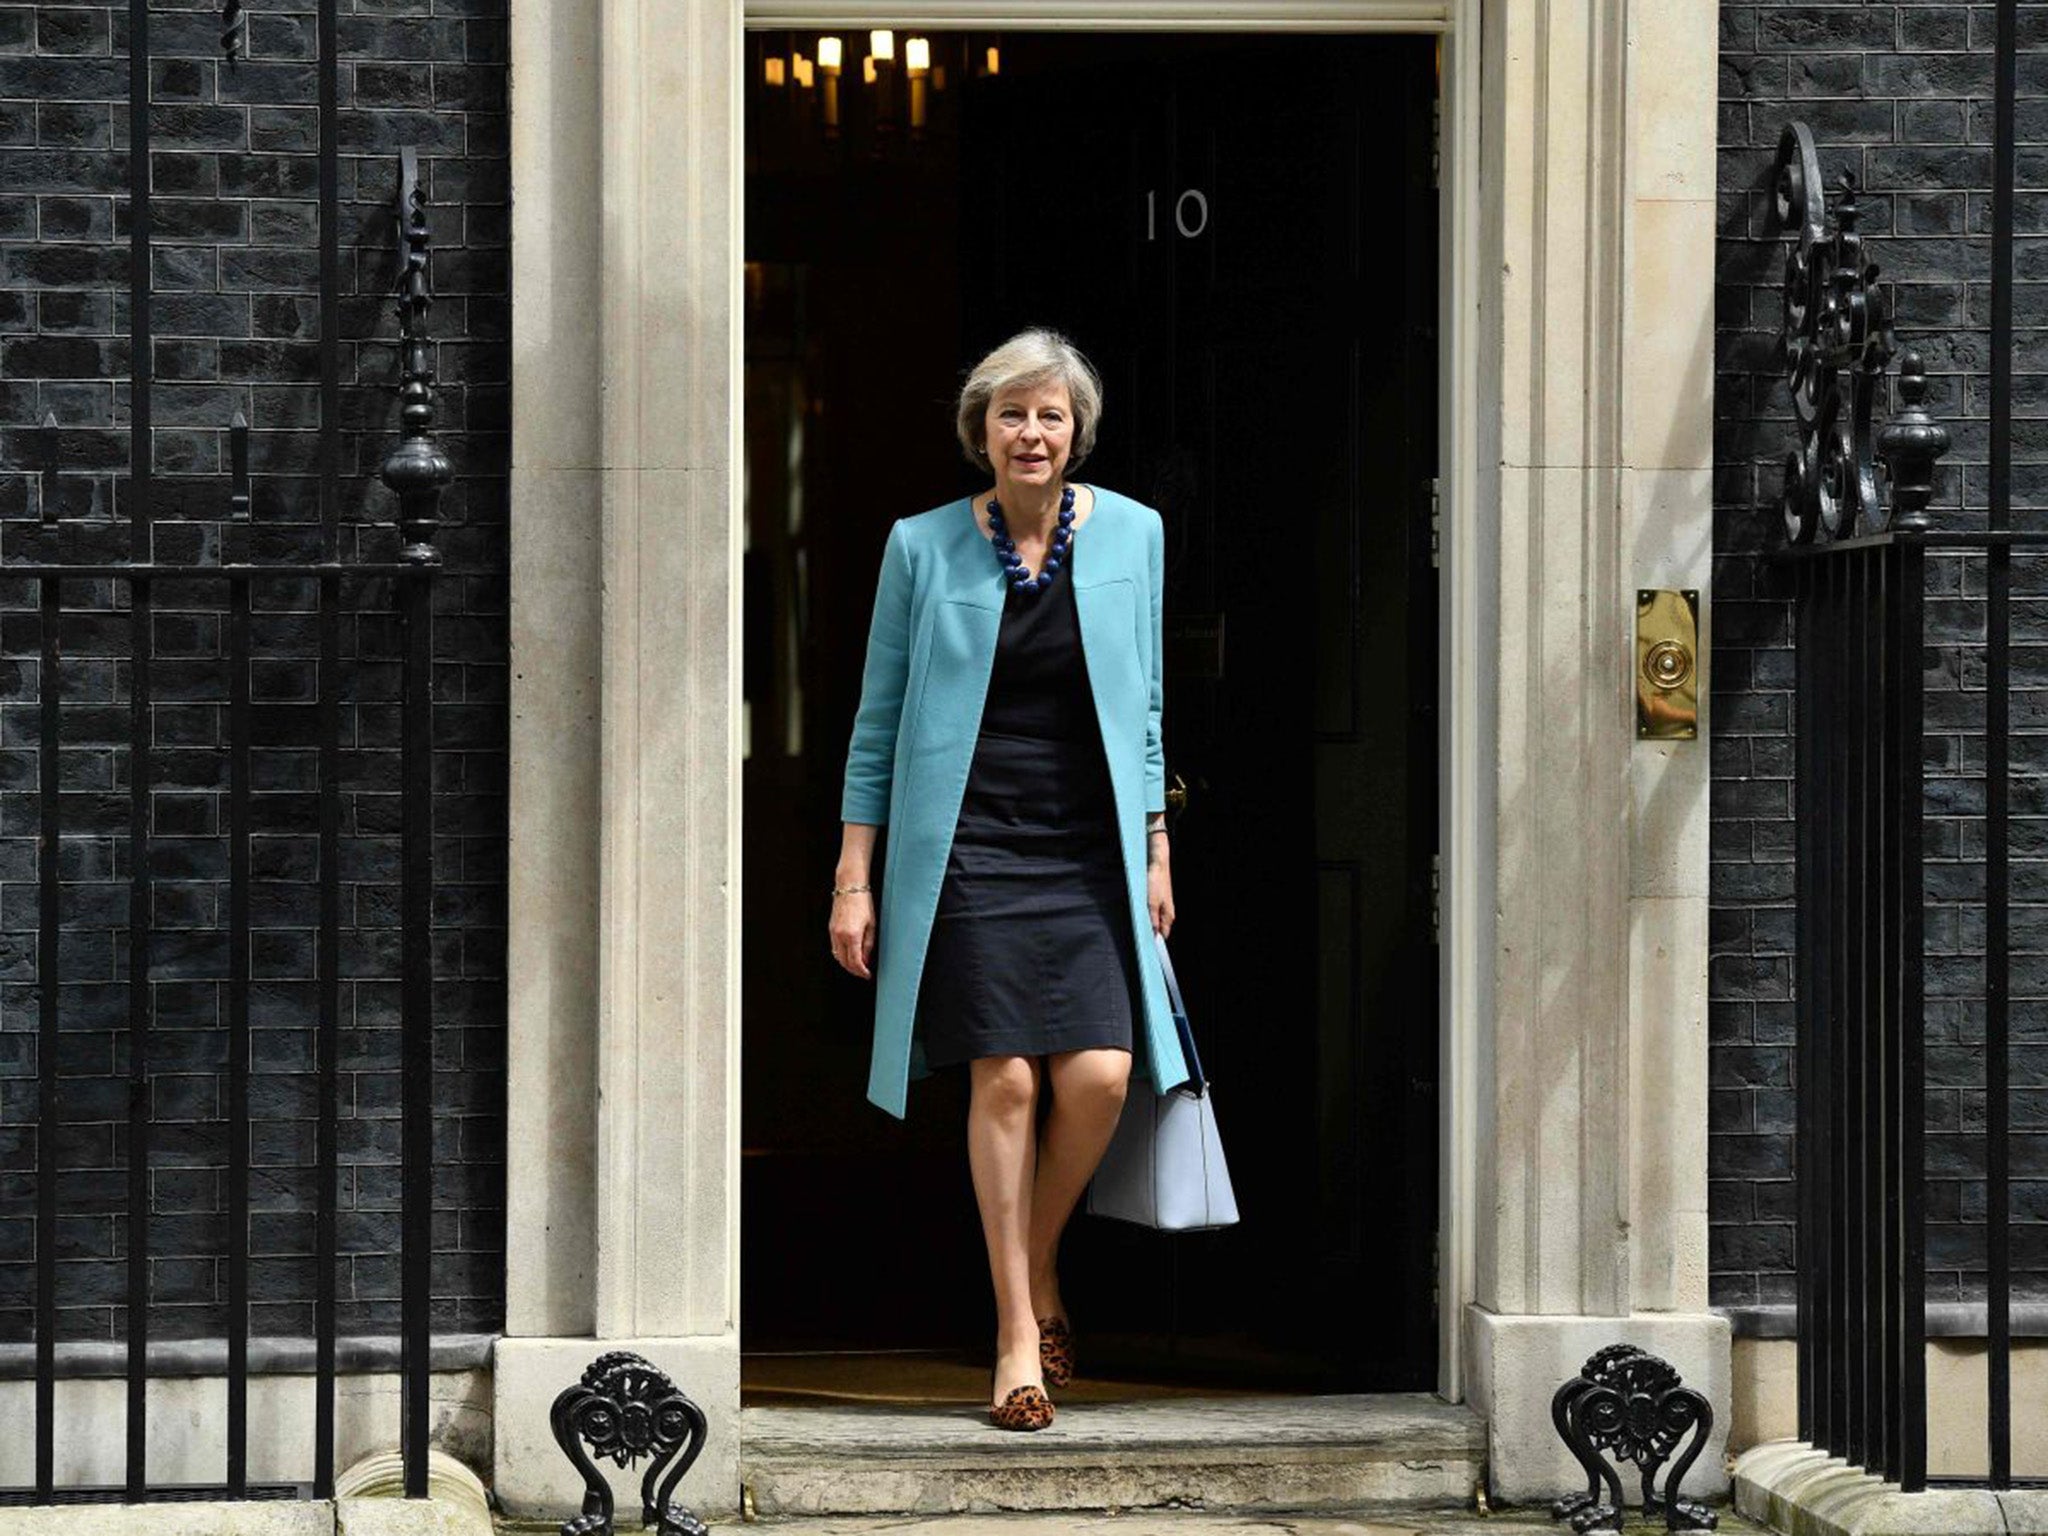 It is expected that Theresa May will be made Britain's new Prime Minister on Wednesday